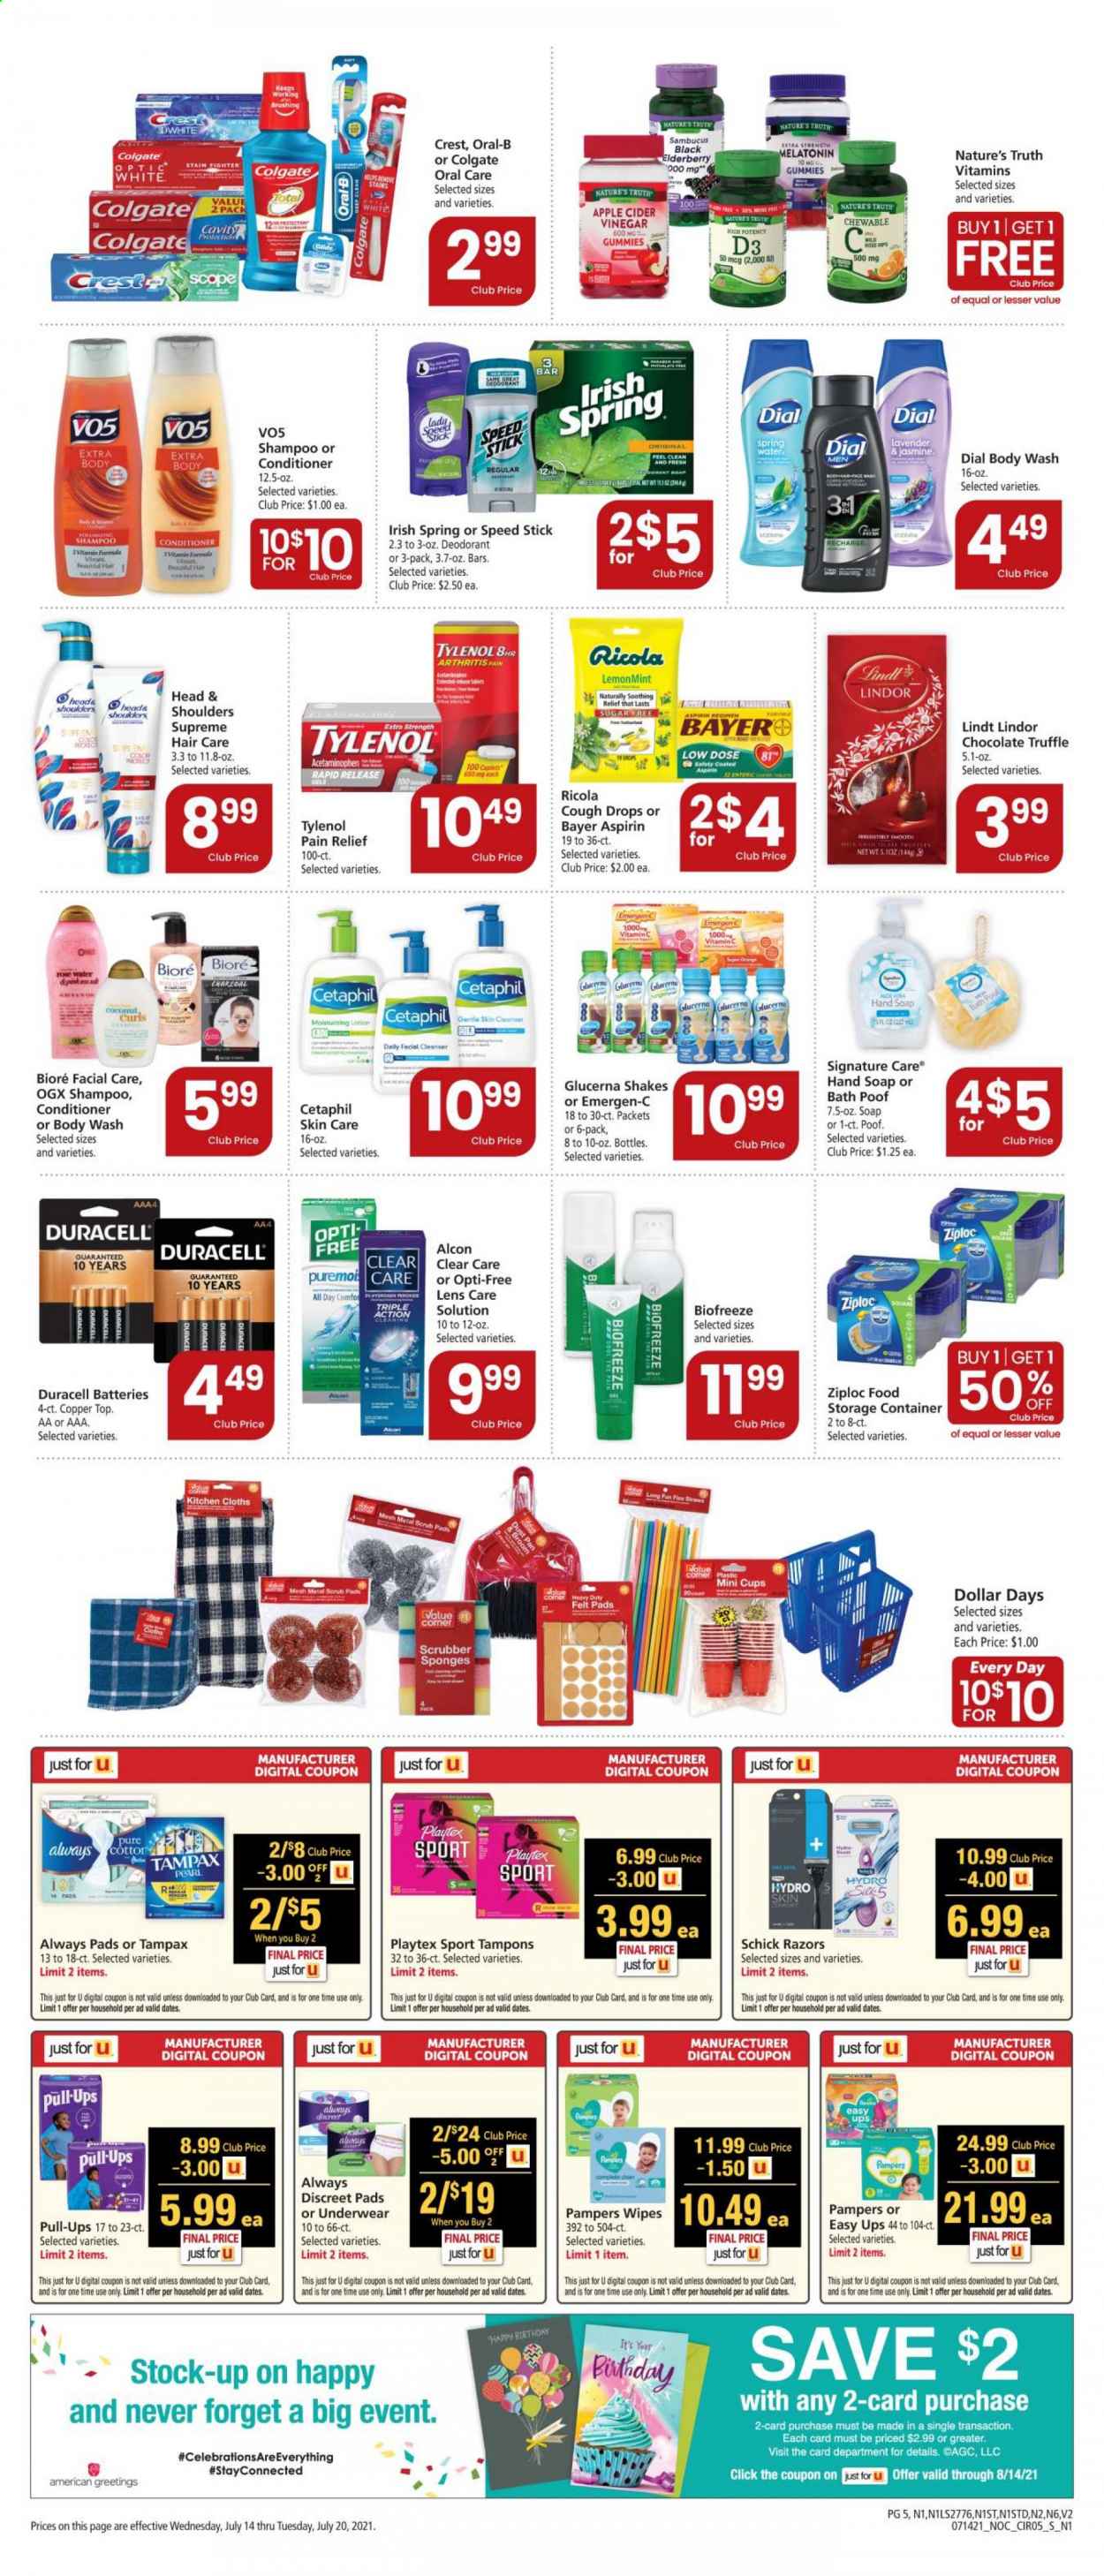 thumbnail - Safeway Flyer - 07/14/2021 - 07/20/2021 - Sales products - shake, ricola, chocolate, Lindt, Lindor, truffles, Ace, vinegar, spring water, rosé wine, wipes, body wash, shampoo, hand soap, Dial, soap, Colgate, Oral-B, Crest, Tampax, Playtex, Always pads, sanitary pads, Always Discreet, tampons, cleanser, Bioré®, OGX, conditioner, Head & Shoulders, VO5, body lotion, Schick, Ziploc, sponge, storage box, Clear Care, Melatonin, Nature's Truth, Tylenol, vitamin c, pain relief, Glucerna, Emergen-C, vitamin D3, cough drops, Low Dose, aspirin, Bayer. Page 5.